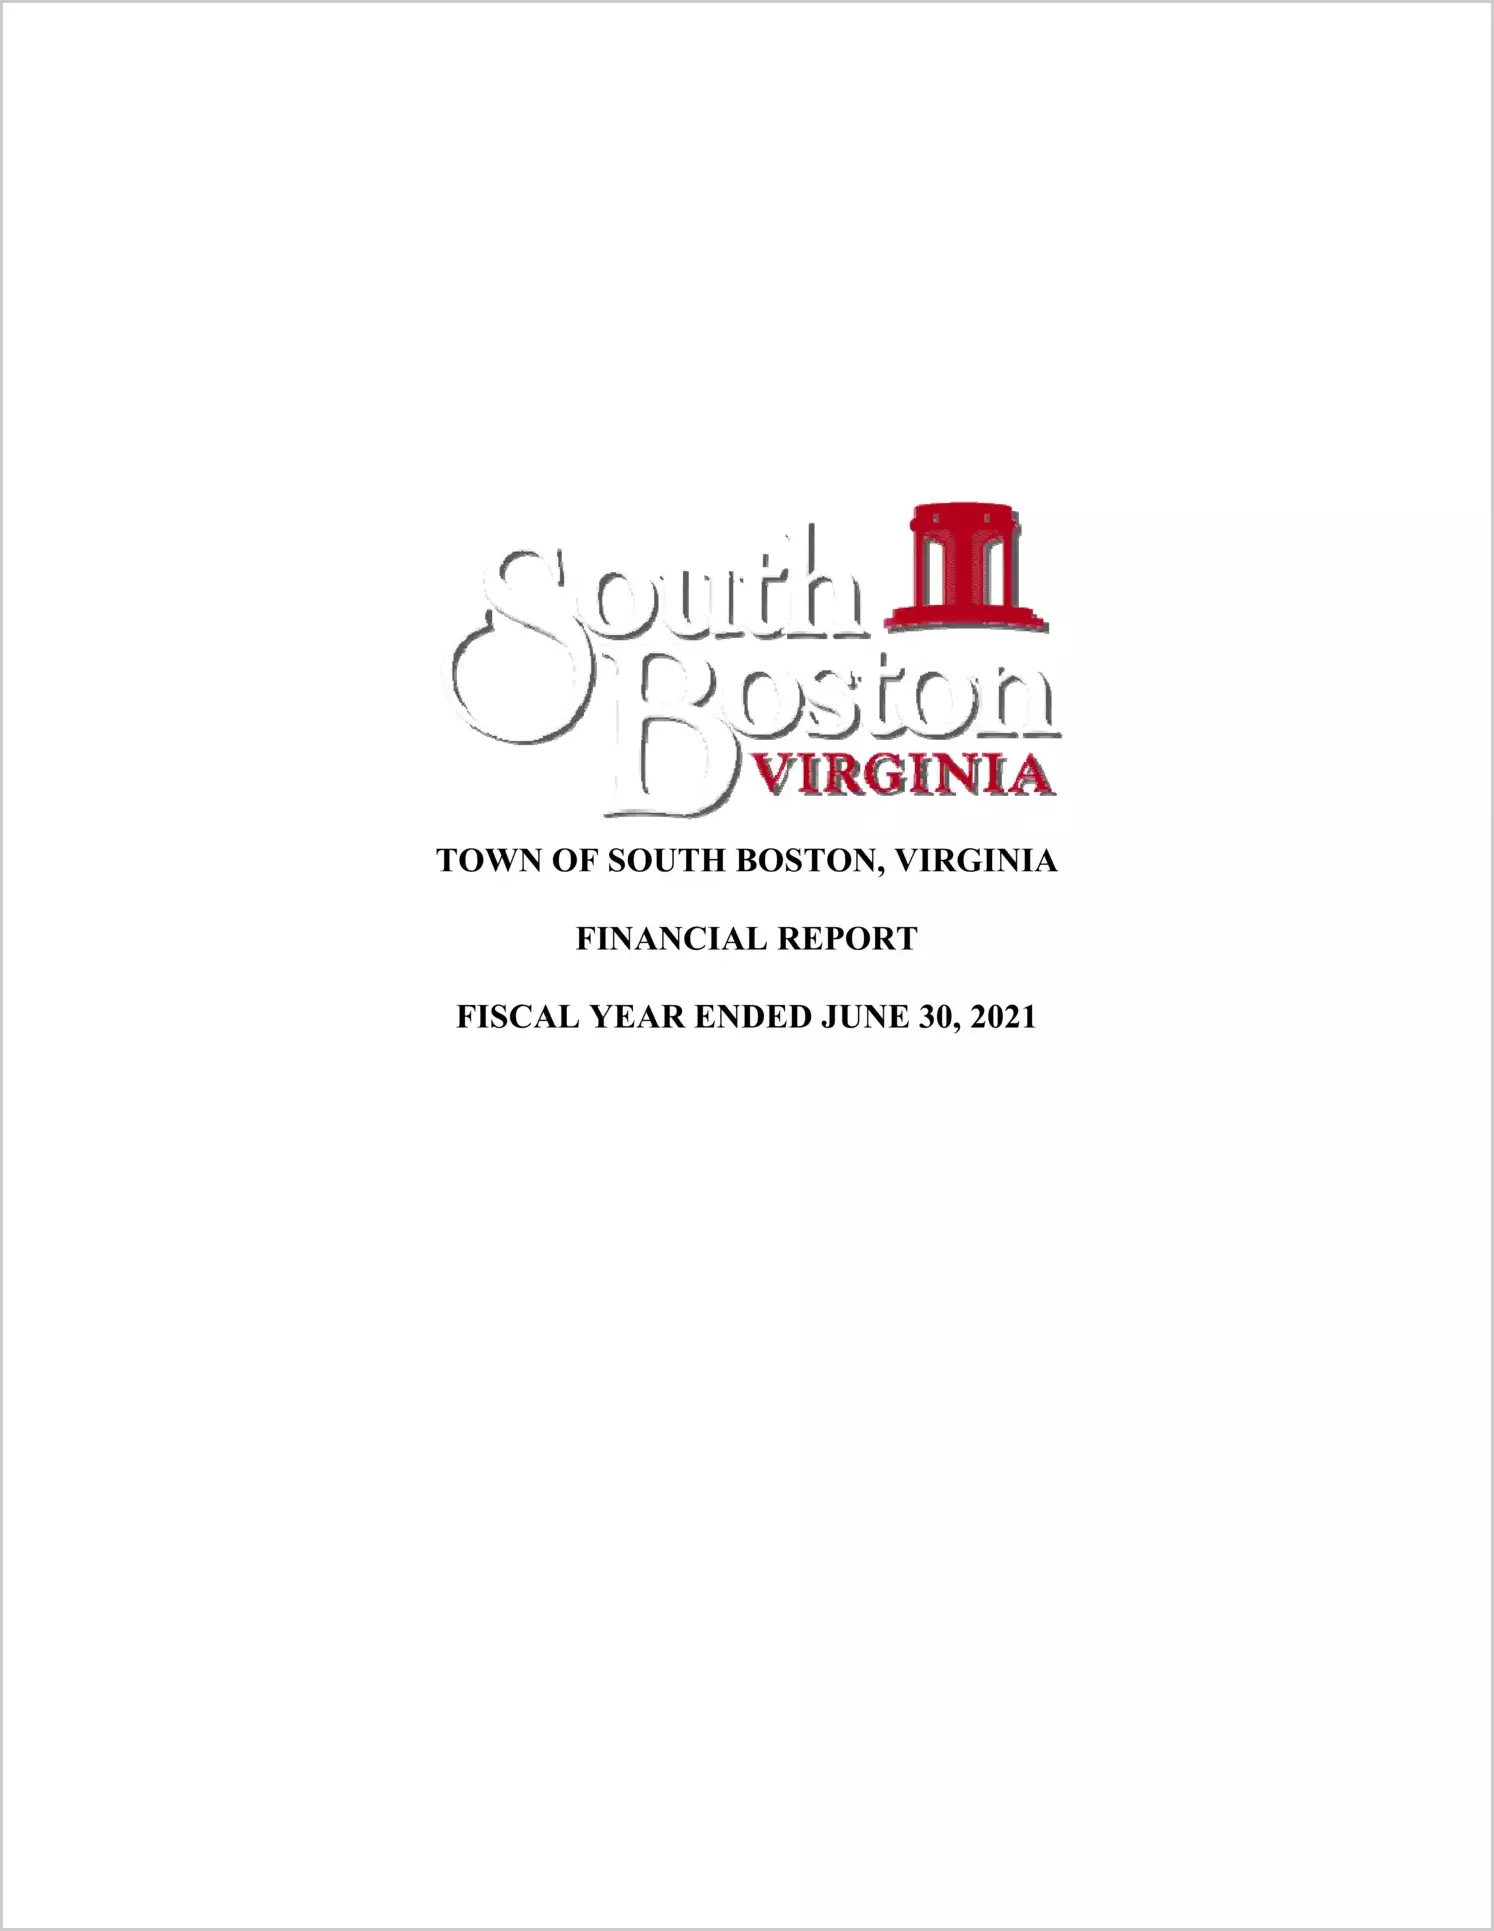 2021 Annual Financial Report for Town of South Boston